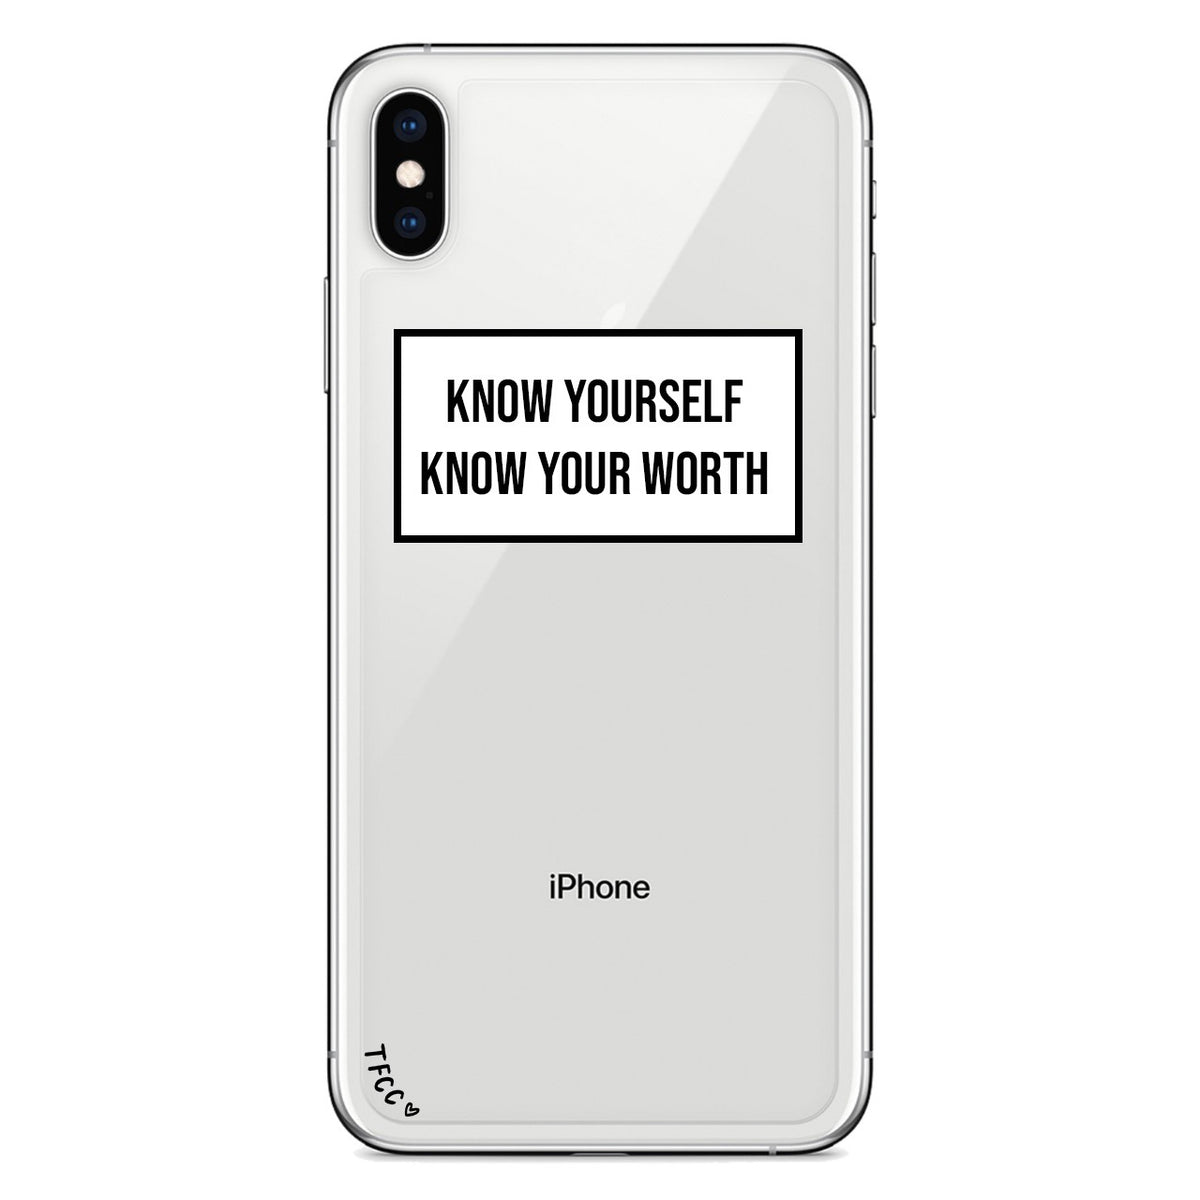 KNOW YOURSELF SLOGAN CASE - thefonecasecompany